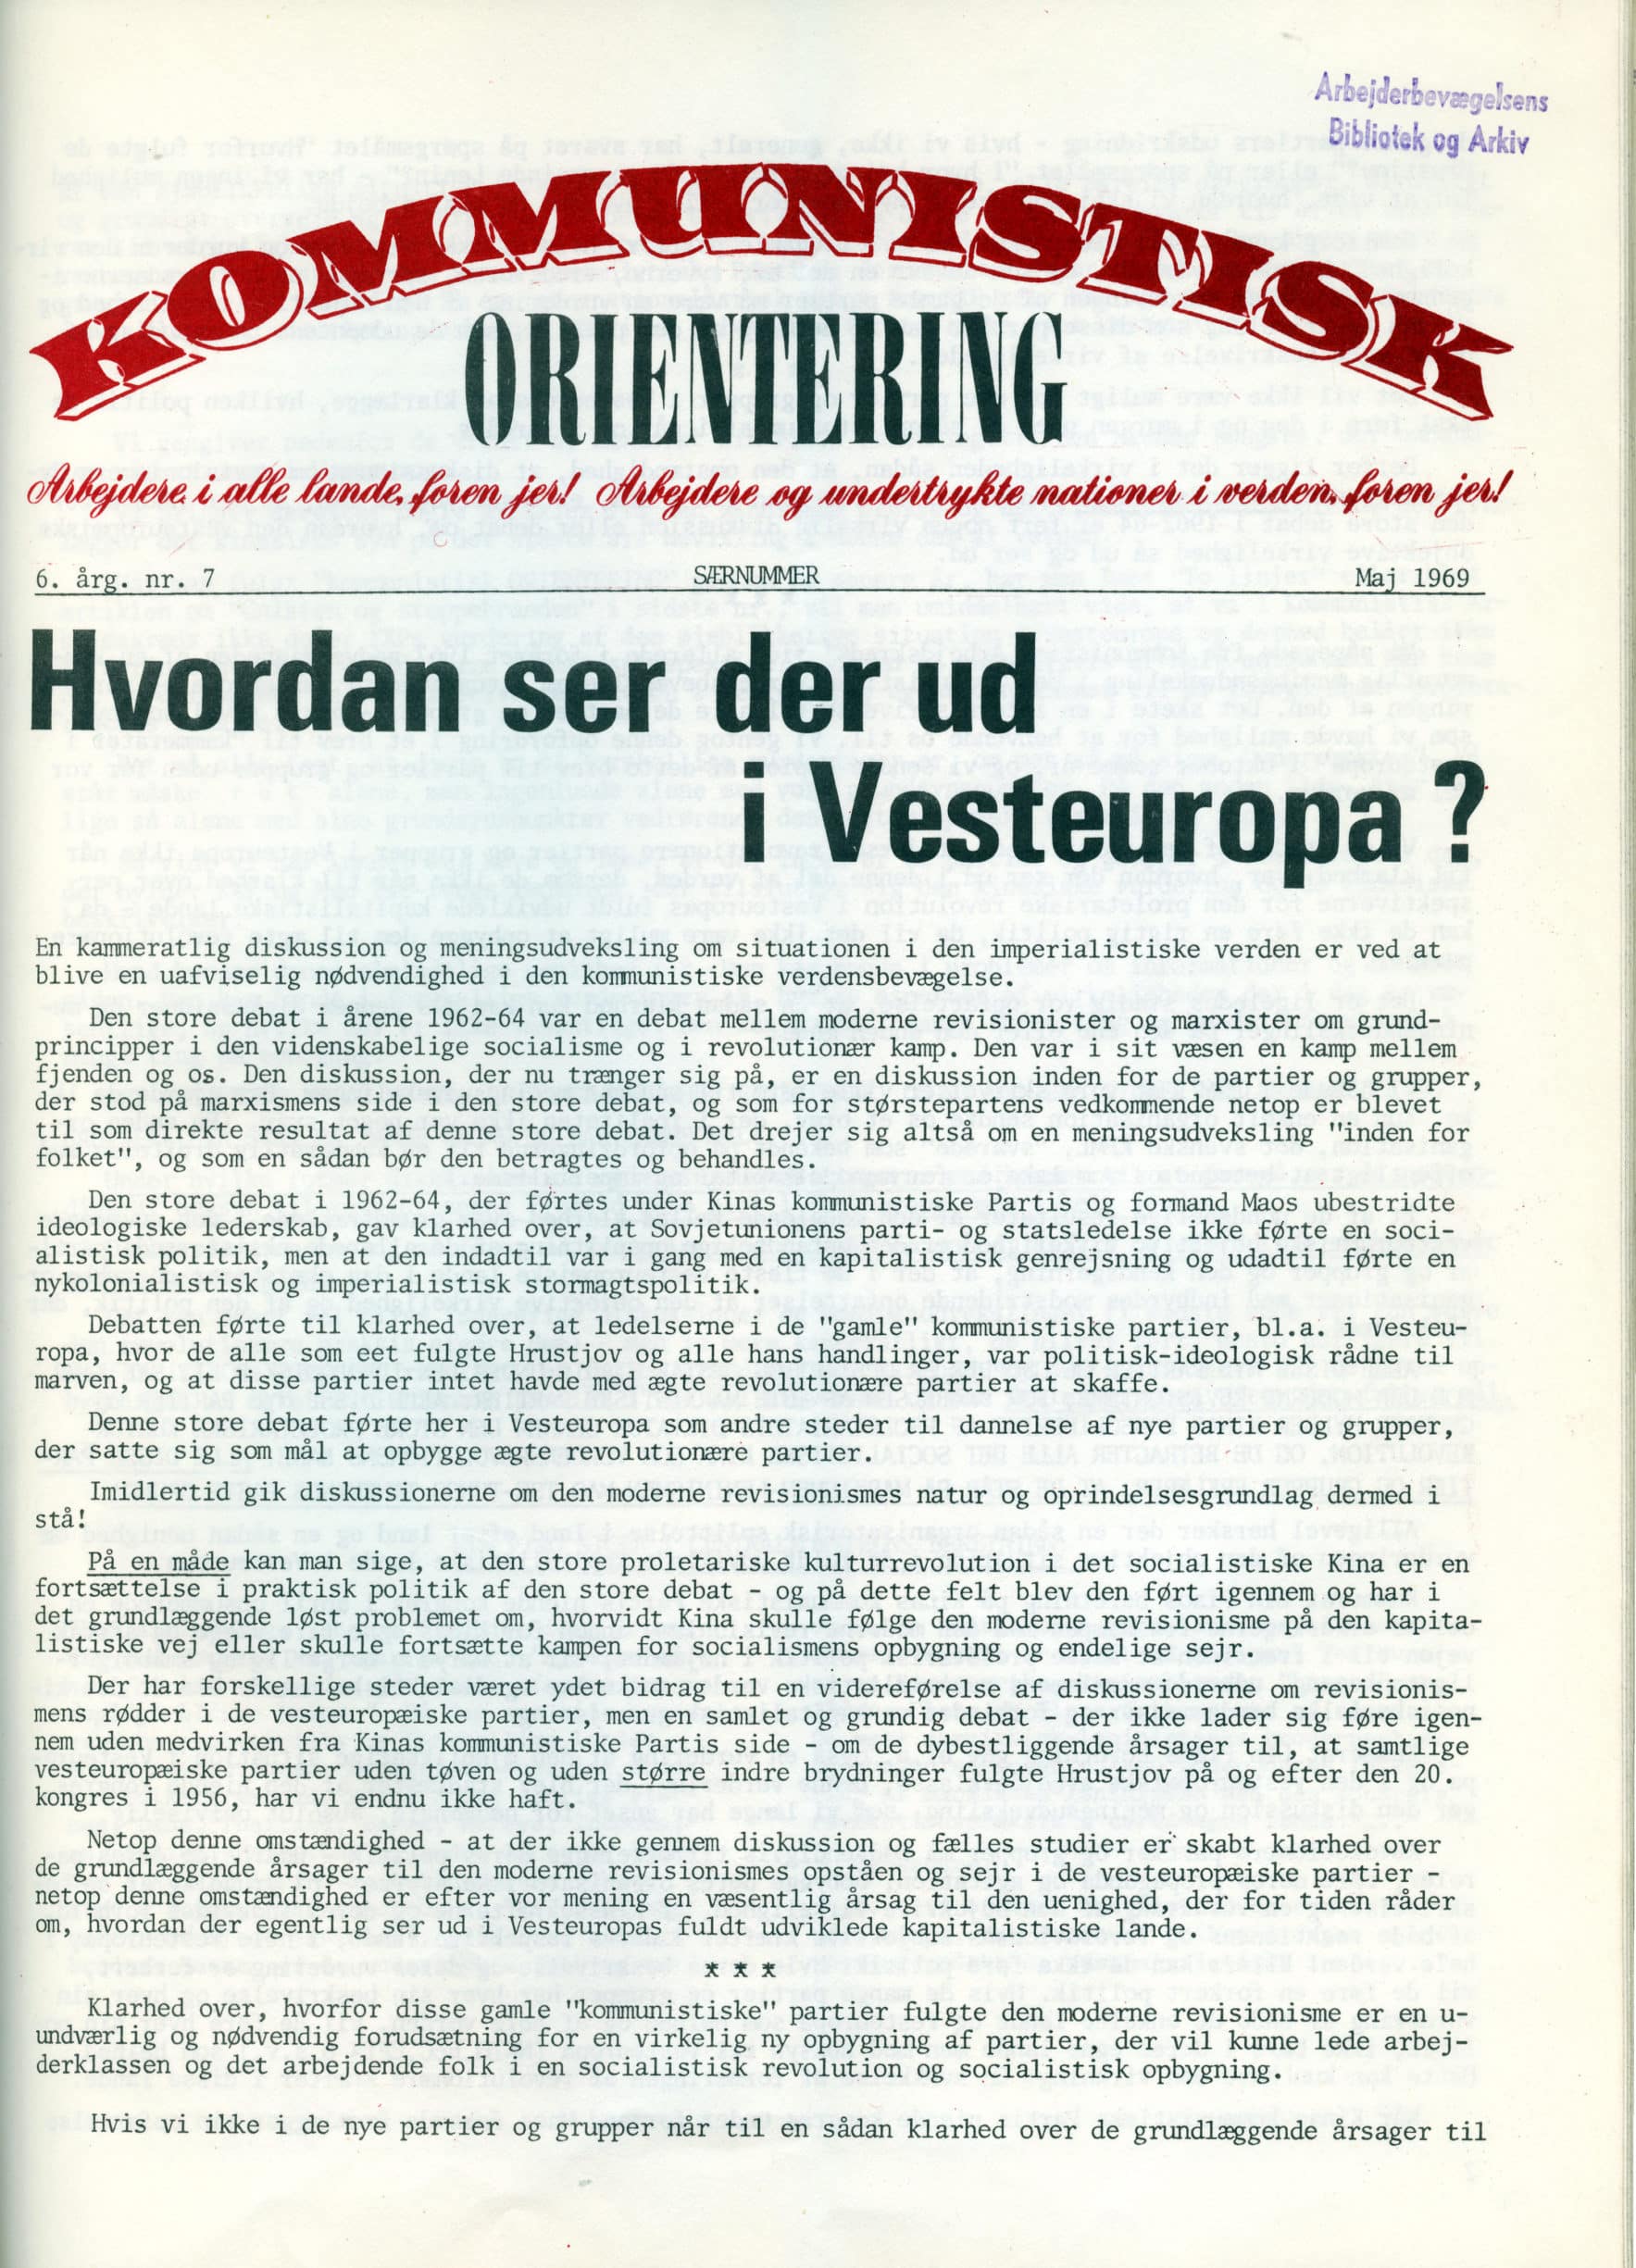 "What is the Situation i Western Europe?" Kommunistisk Orientering special issue, May 1969.